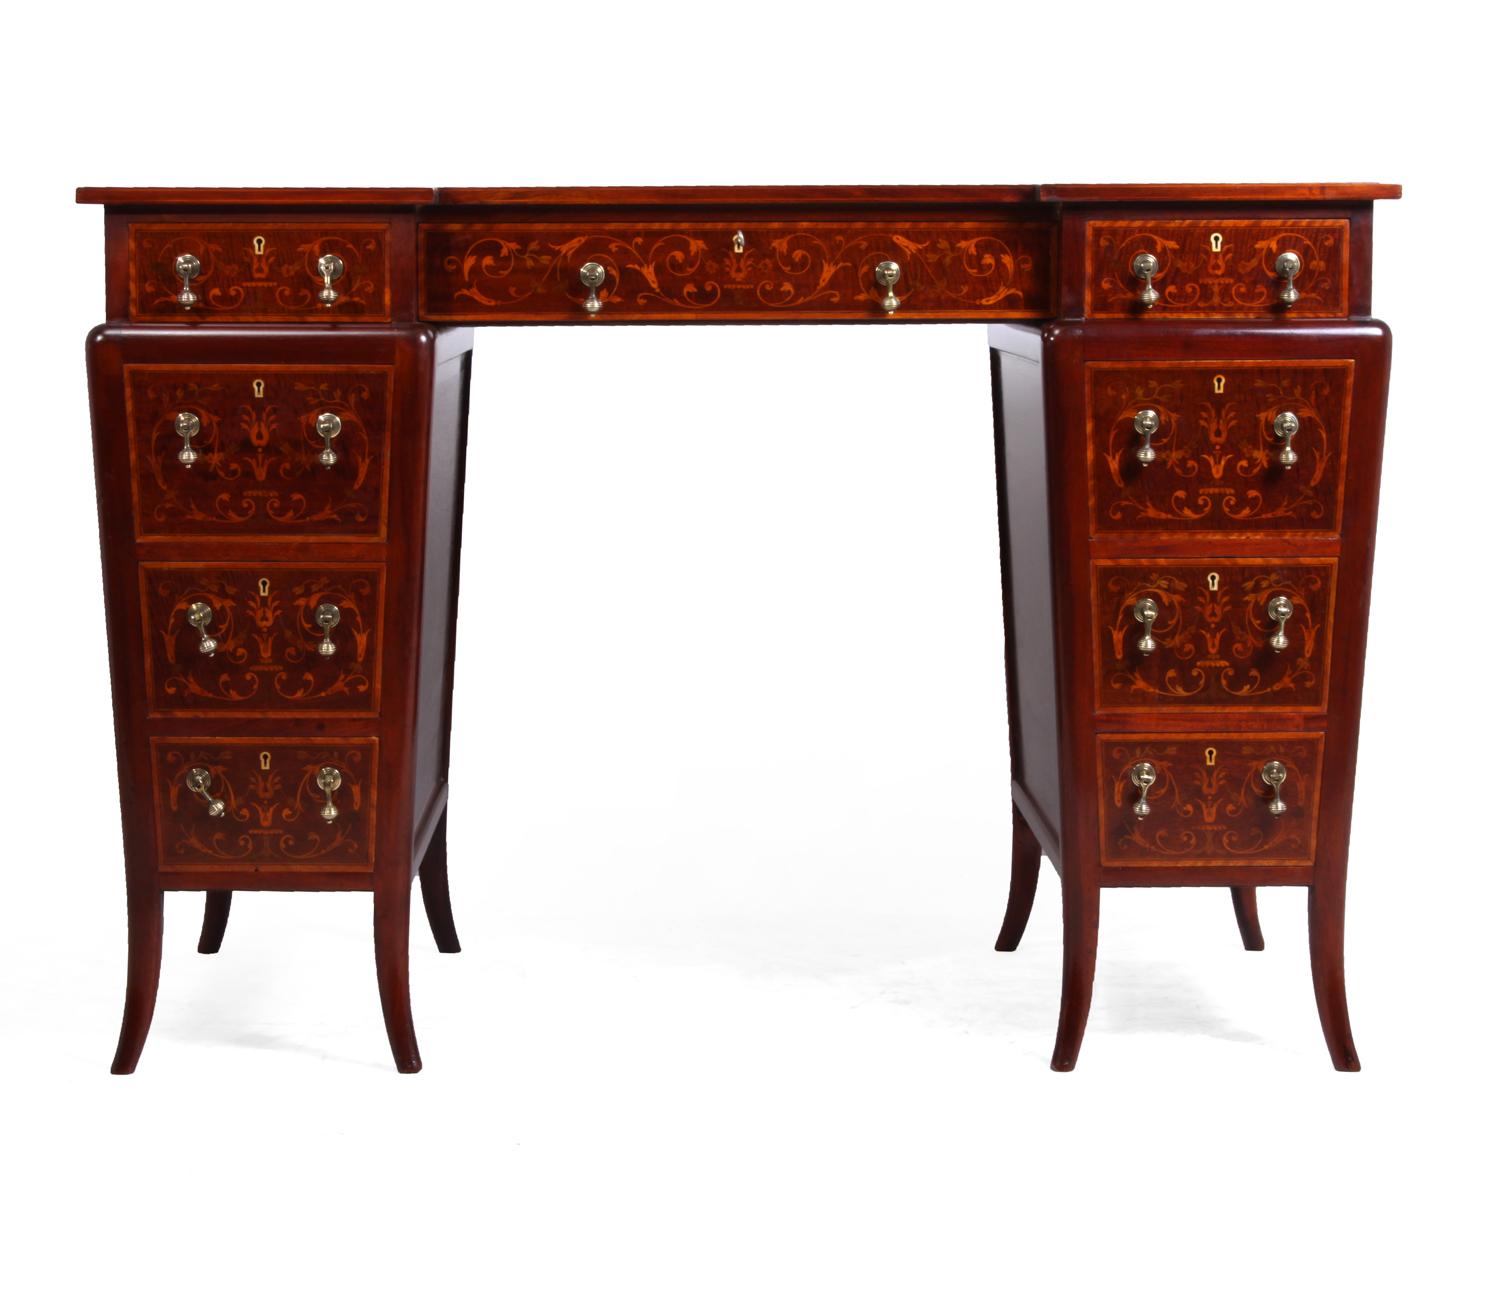 Antique ladies writing desk by Edwards and Roberts, circa 1900
A very good quality late 19th century mahogany inlaid writing desk, stamped Edwards and Roberts. Having the original inset leather tooled top with satinwood cross-banding and ebony and